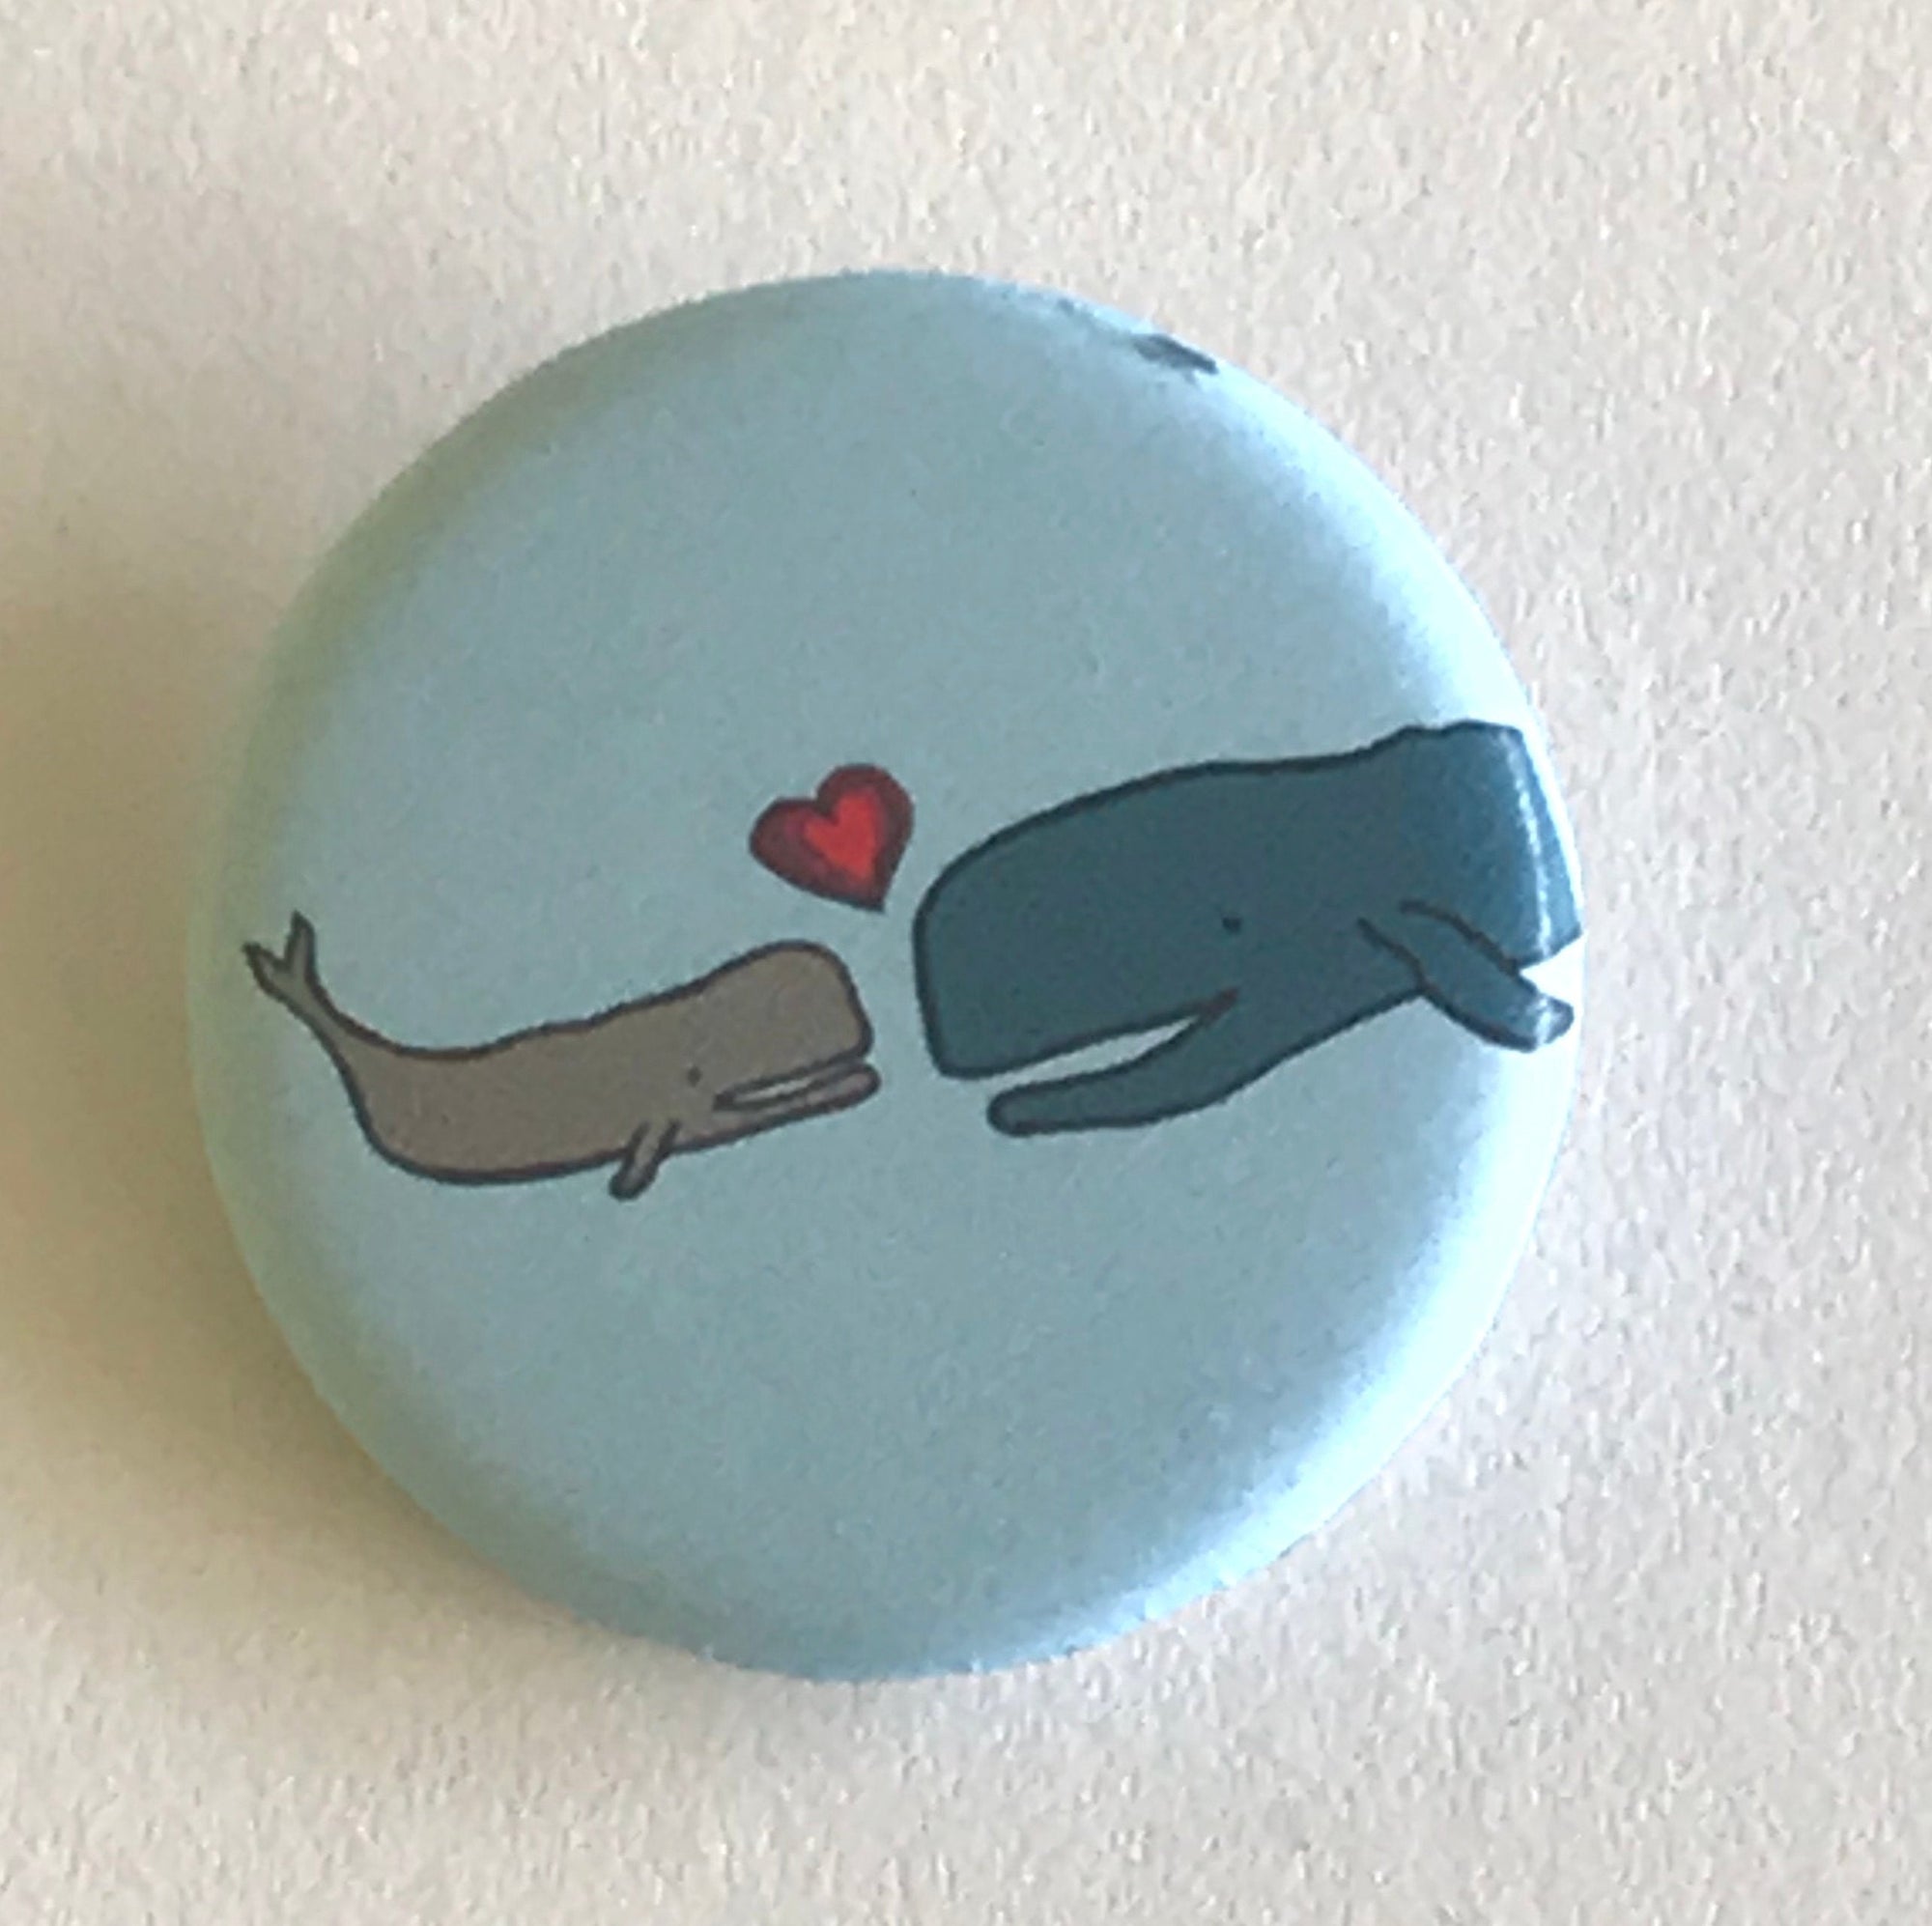 Magnet - 1.25 Inch: Whales Pattern